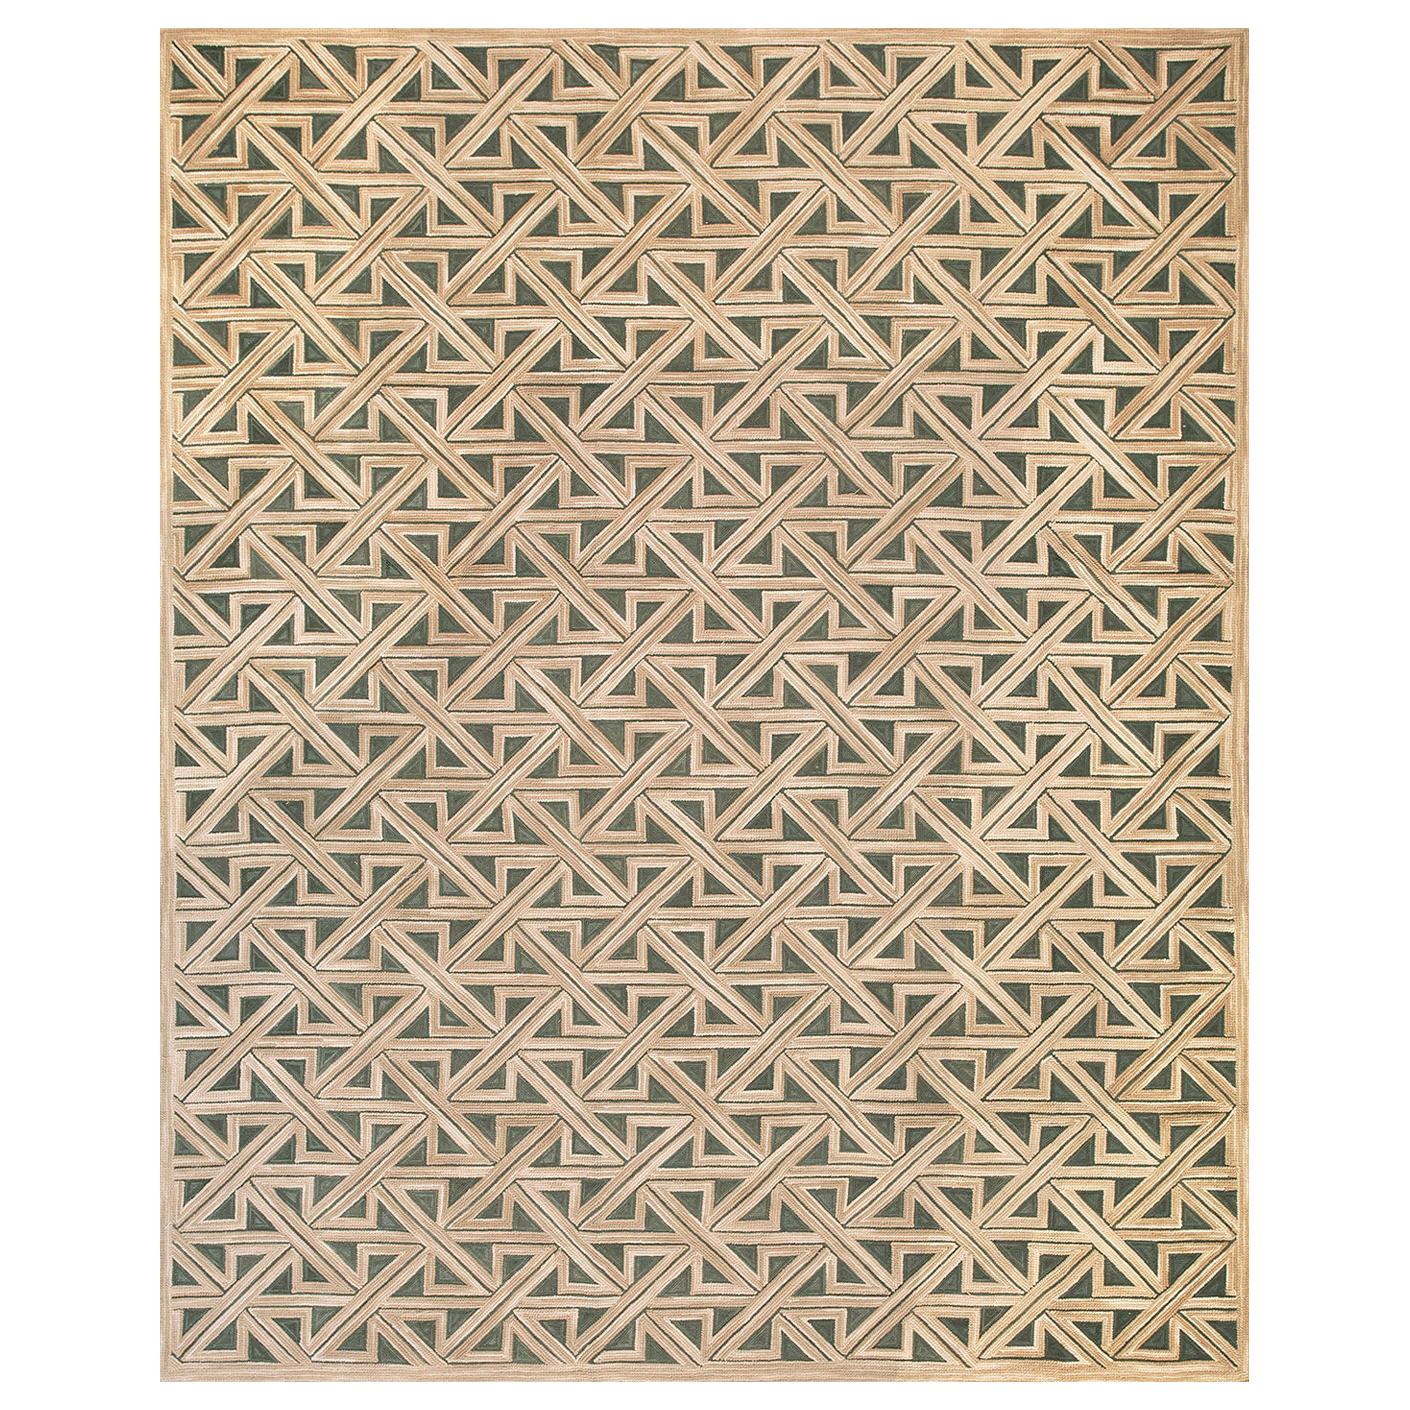 Contemperory Cotton Hooked Rug ( 8' x 10' - 245 x 305 )